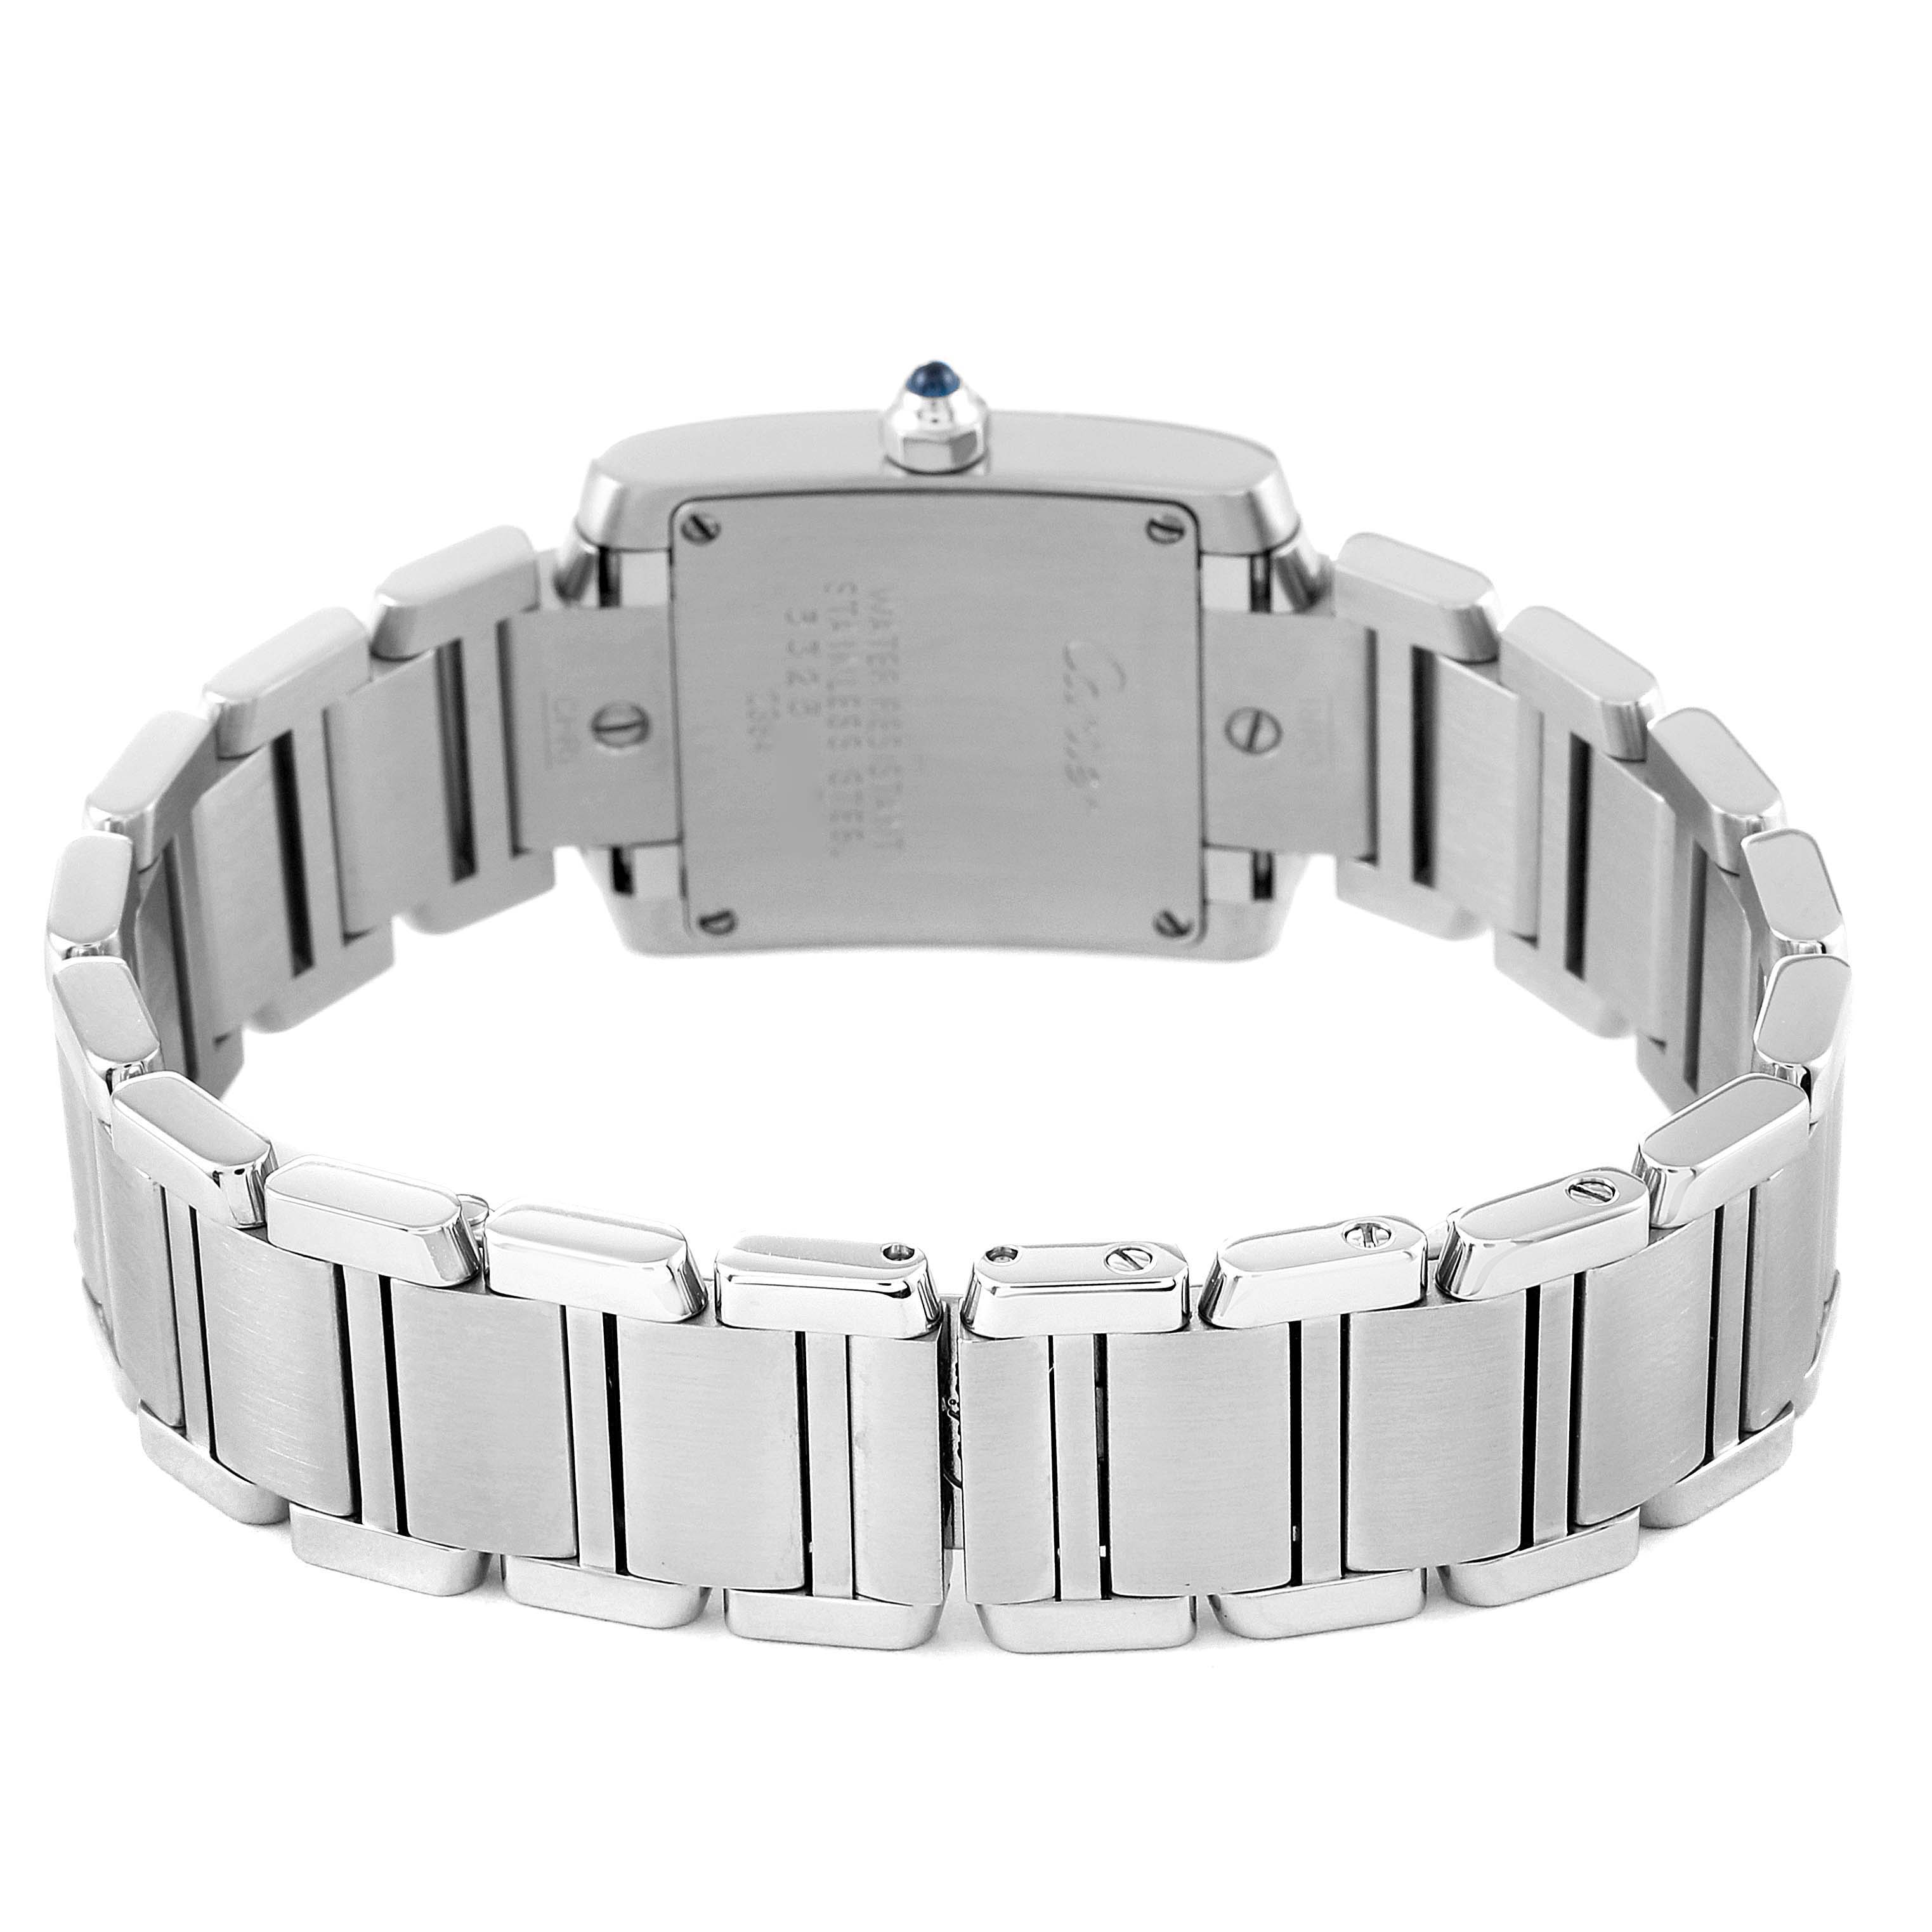 Cartier Tank Francaise Small Steel Ladies Watch W51008Q3 | SwissWatchExpo